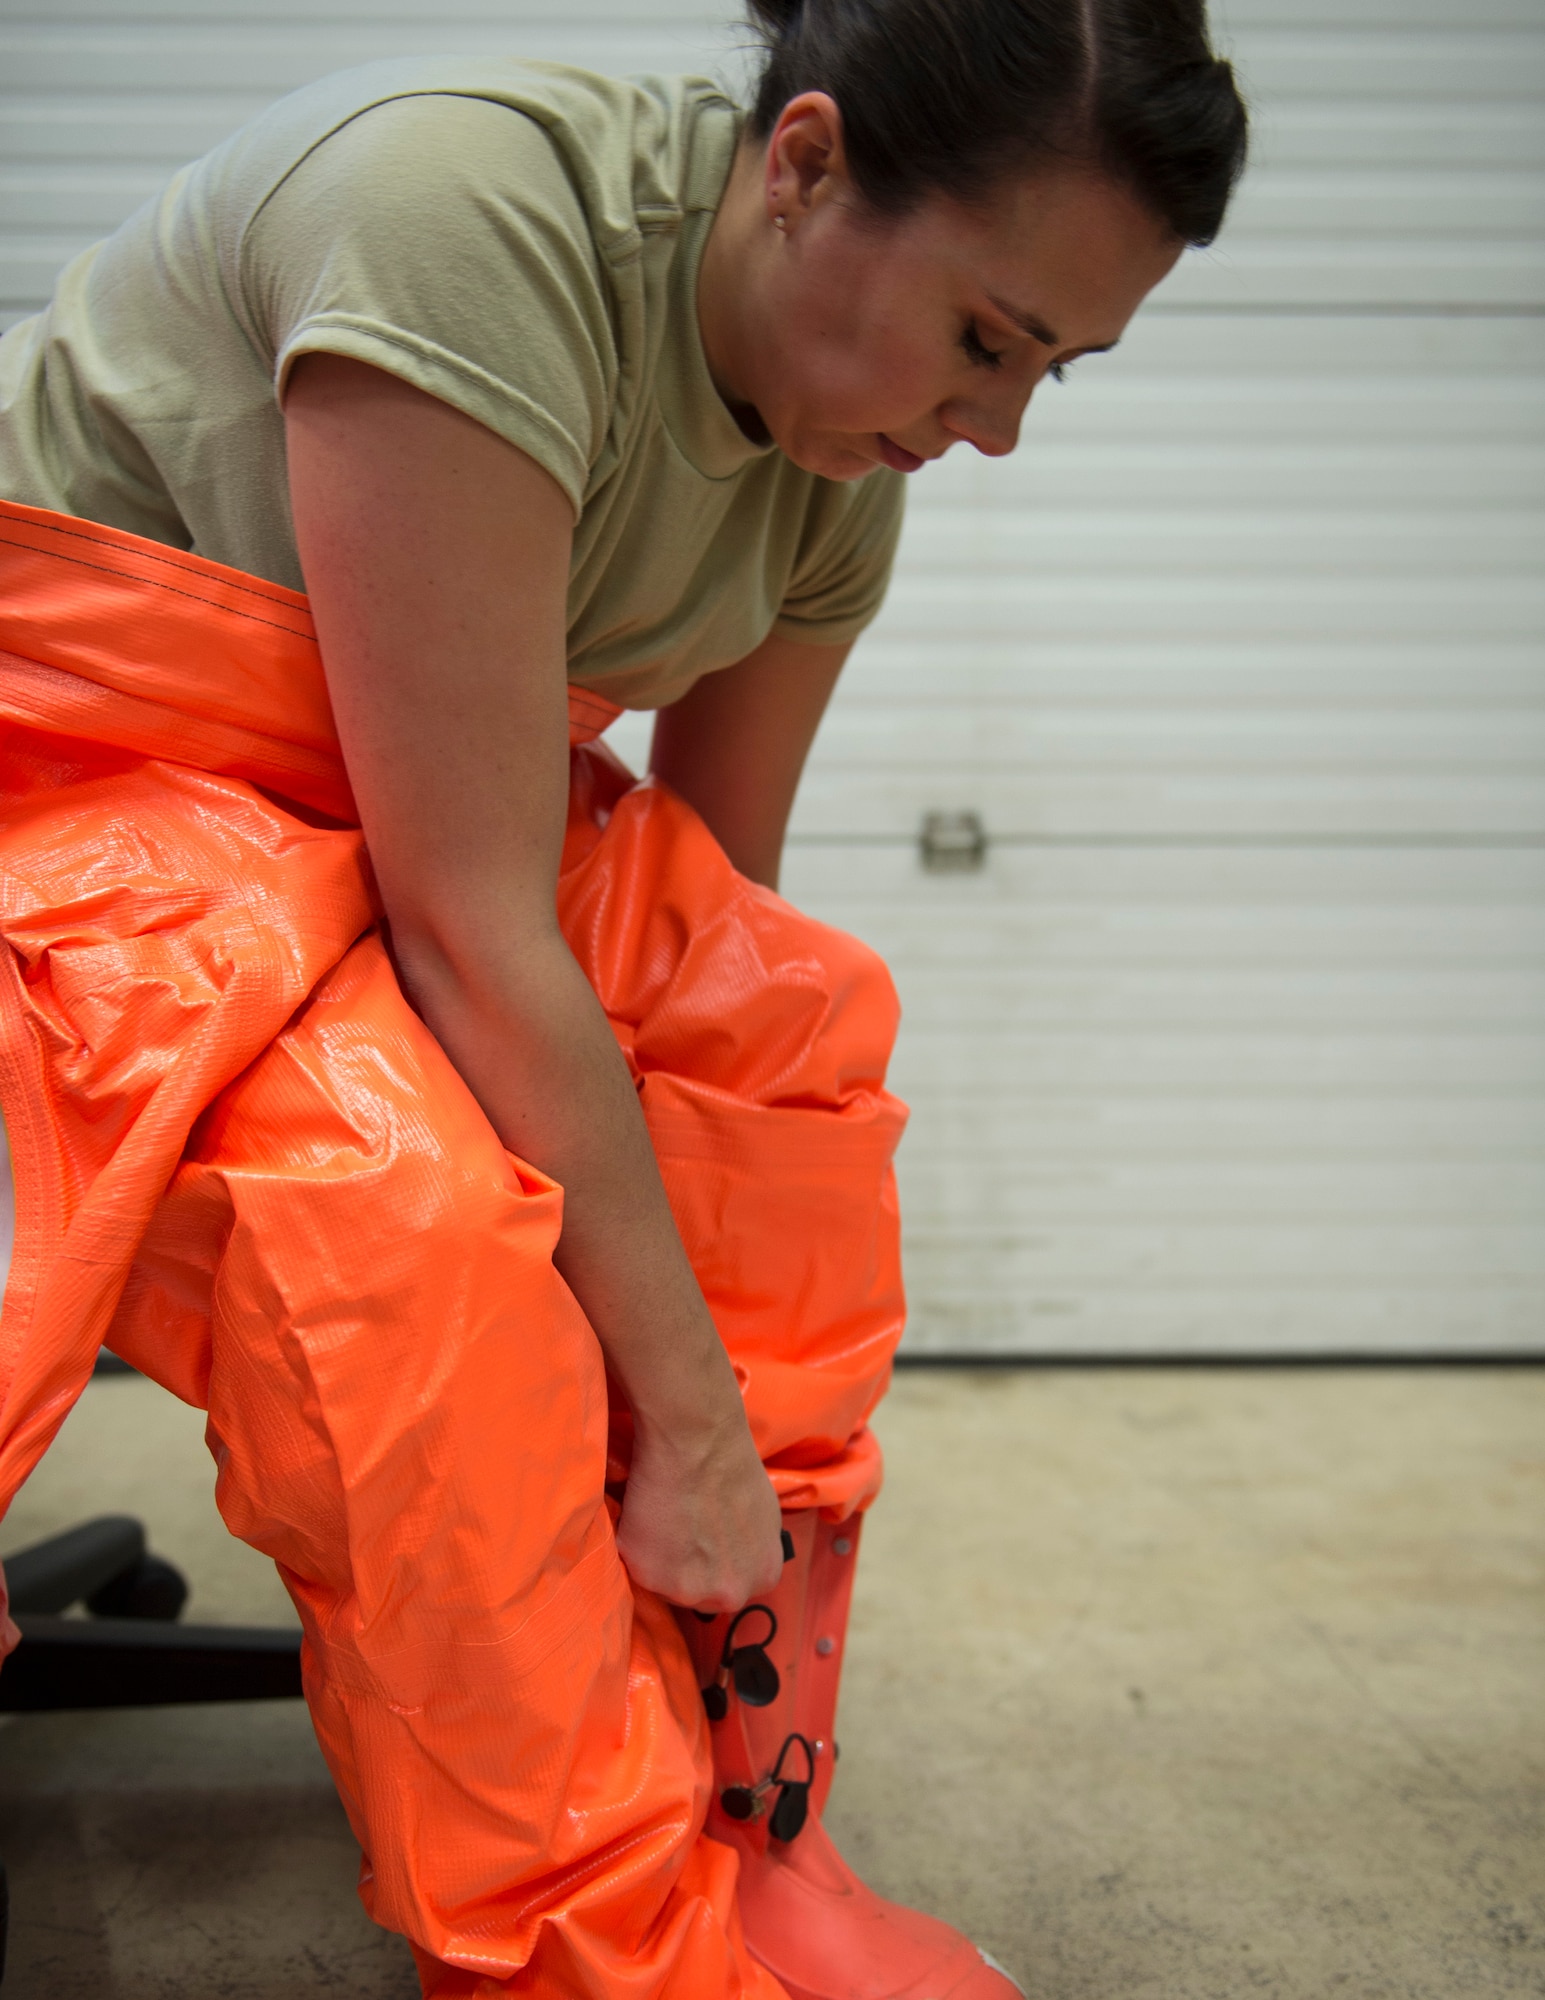 U.S. Air Force Senior Airman Morgan Johnson, an emergency manager with the 133rd Civil Engineer Squadron, puts on a HAZMAT suit in St. Paul, Minn., March 11, 2020.